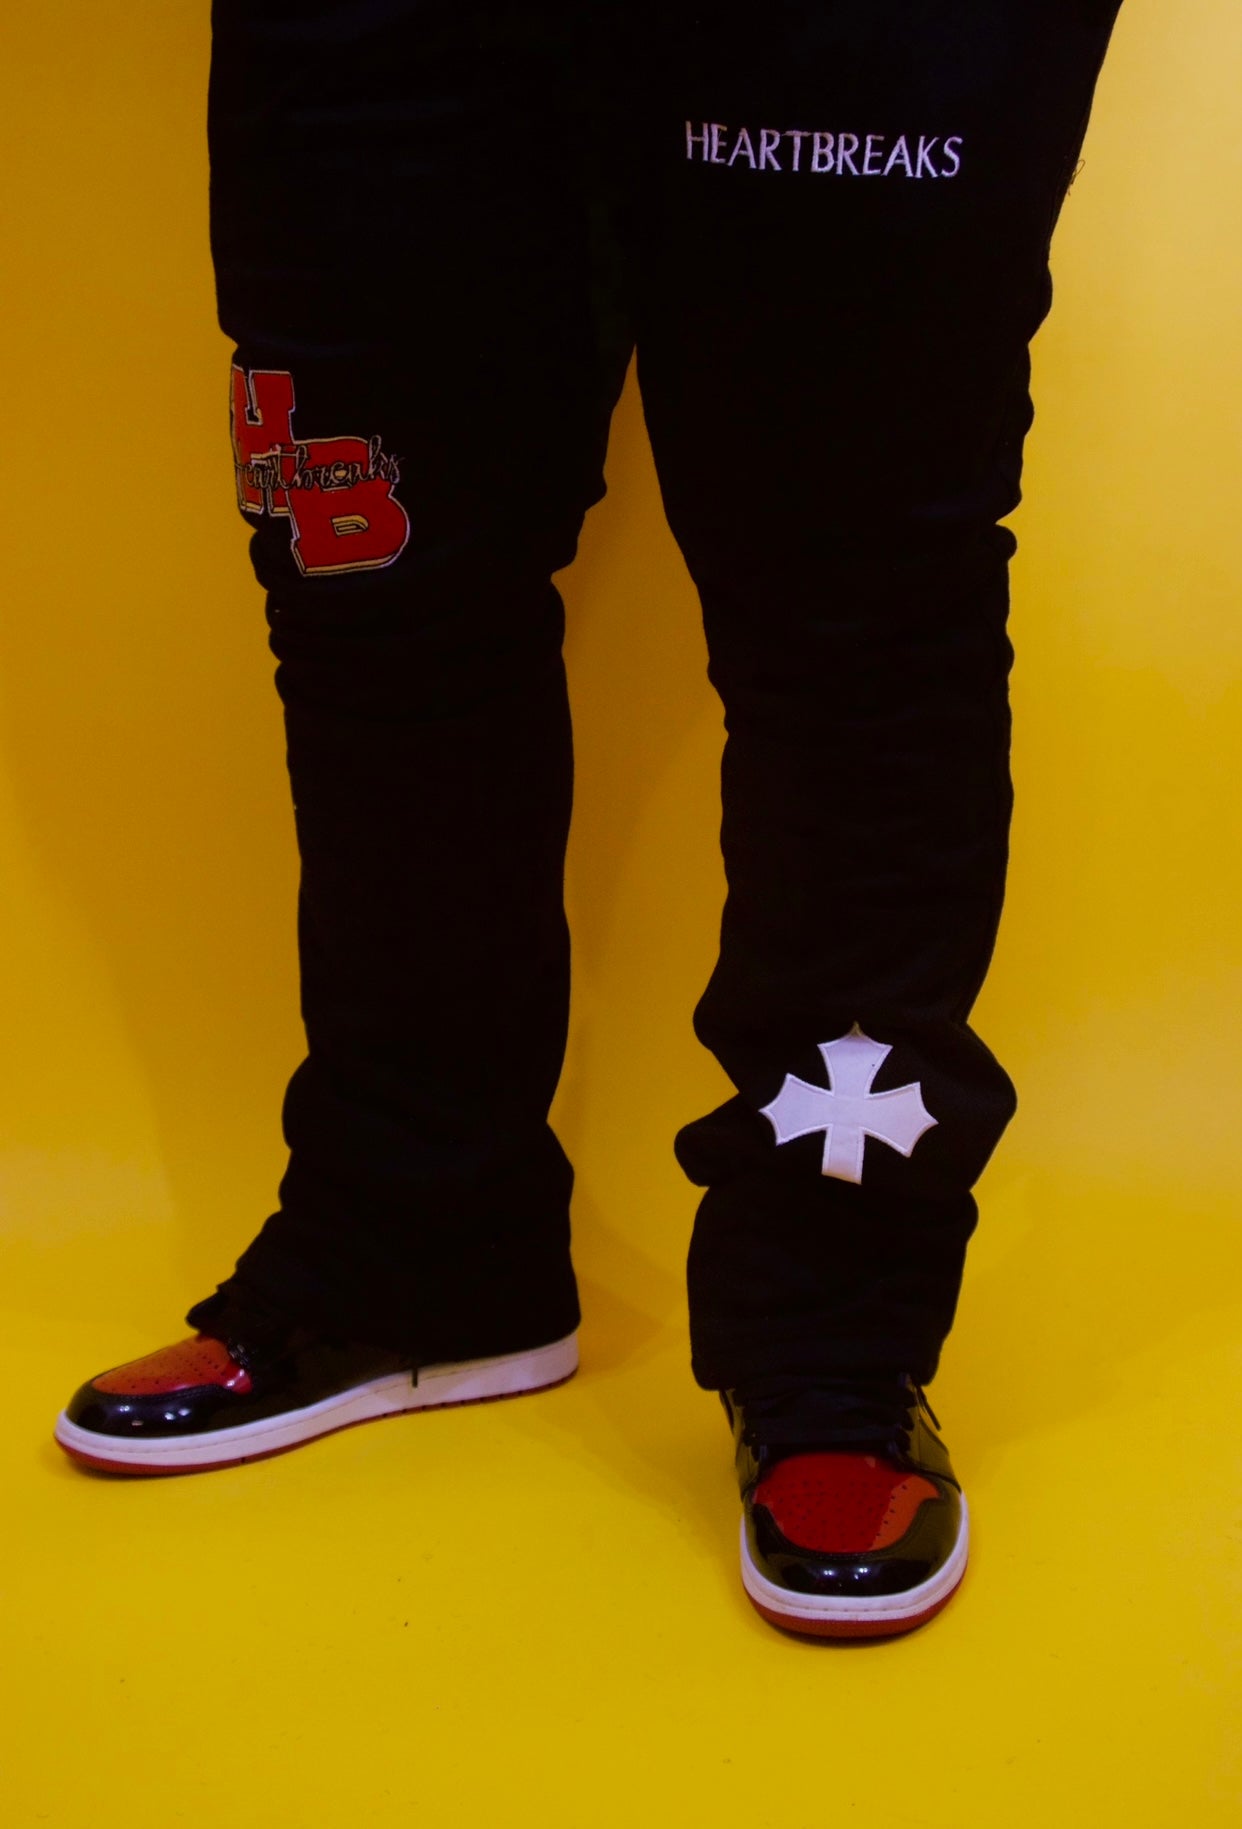 NMHB (Black) Stacked Sweatpants